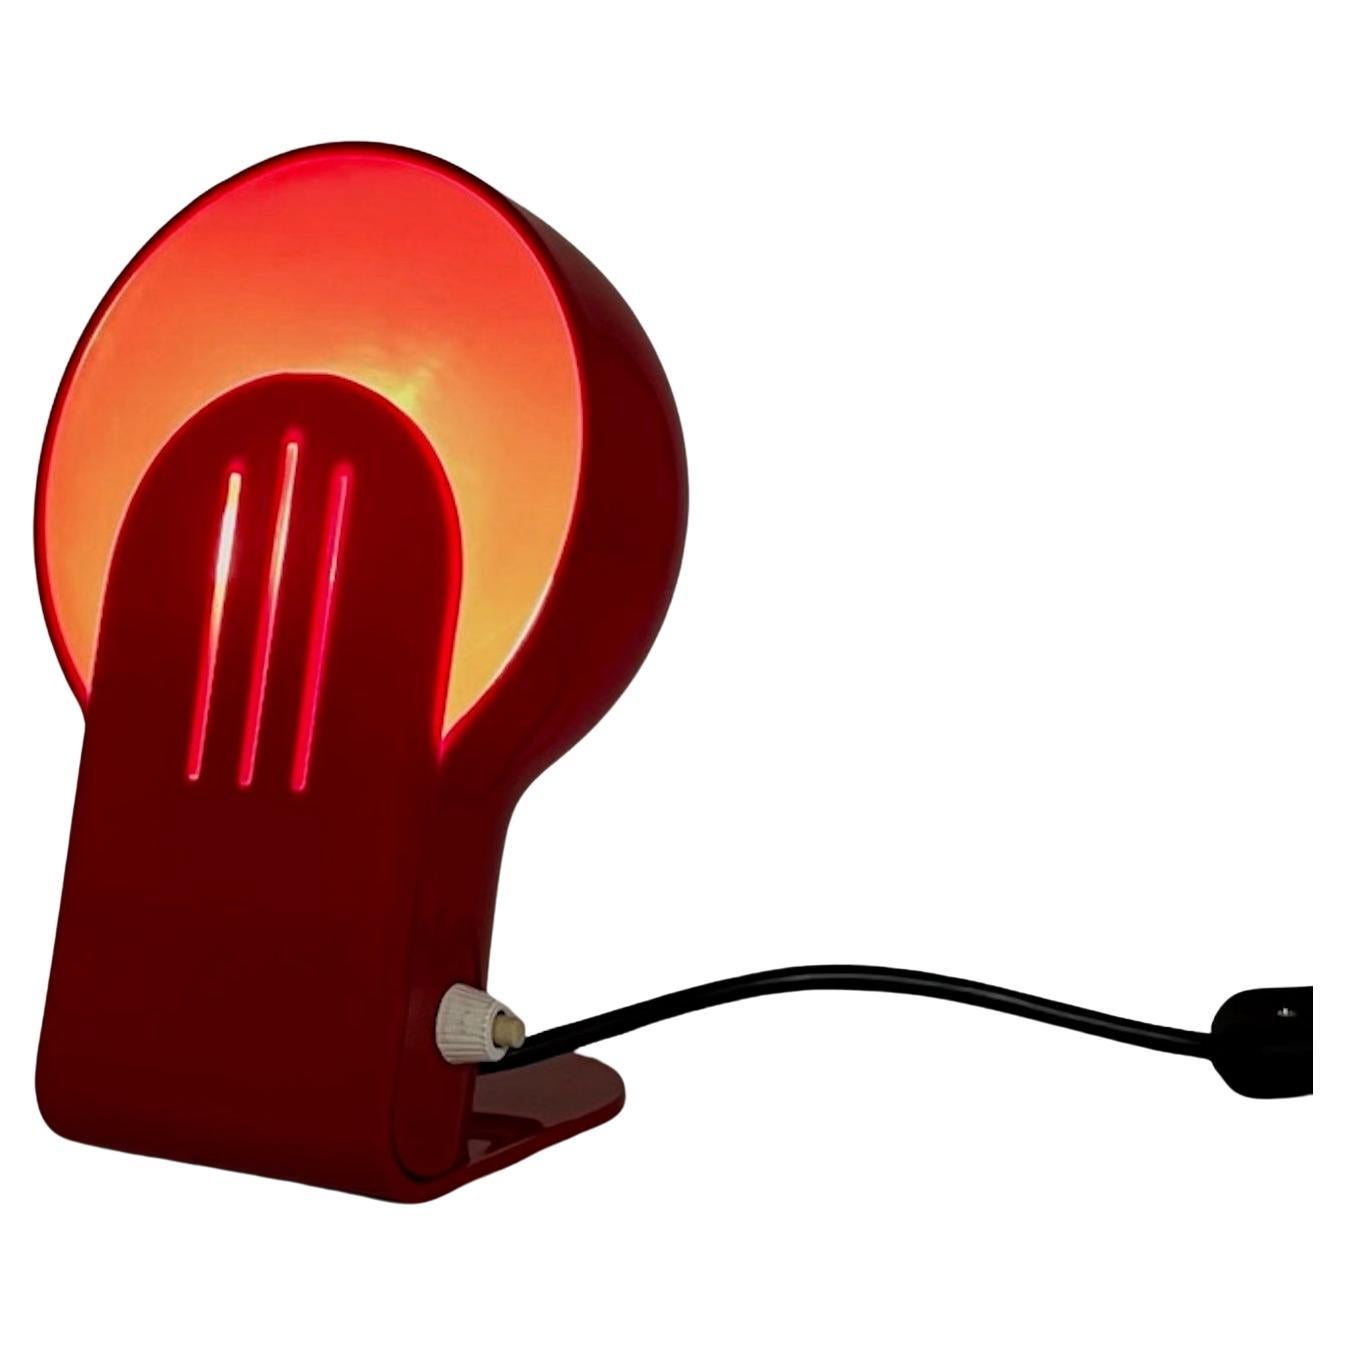 Iconic 'Panda' Lamp in Red Designed by Ambrogio Pozzi for Harveiluce, 1970s For Sale